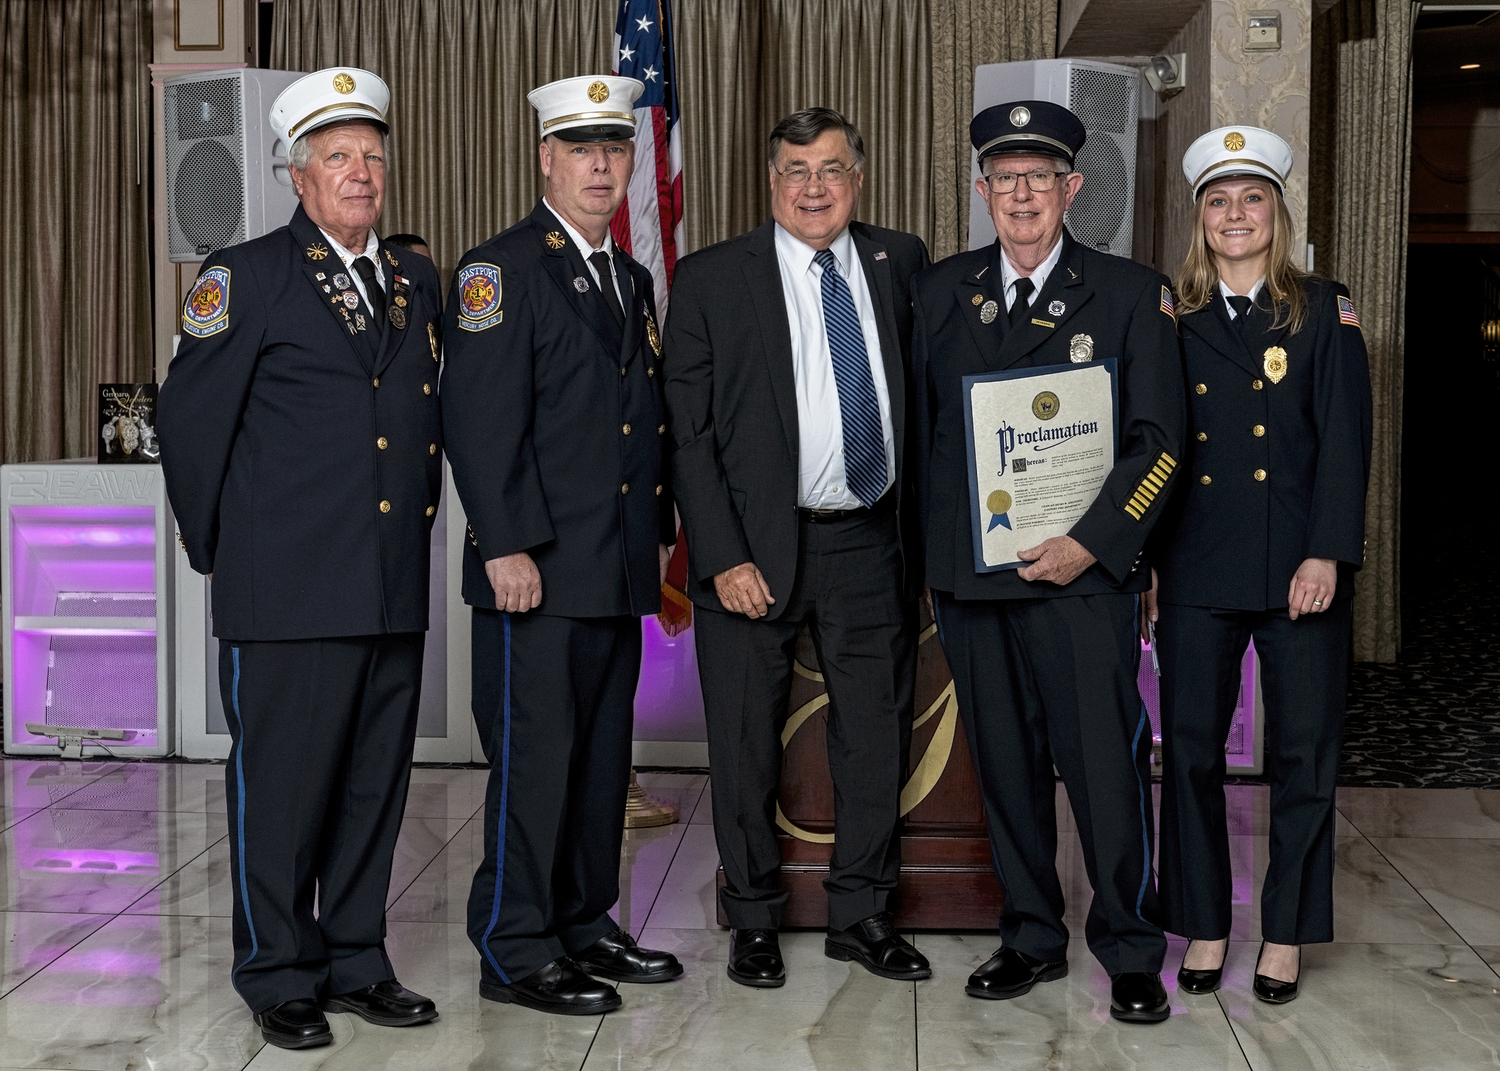 Lieutenant Henry Adelwerth, second from right, received a fifty years of service award at the Eastport Fire Department's 2024 Installation Dinner at Georgio’s in Calverton on  April 13. With him are First Assistant Chief Steven Schaefer, Chief John Dalen, Suffolk County Executive Edward Romaine, and Second Assistant Chief Virginia Massey.   COURTESY EASTPORT FIRE DEPARTMENT